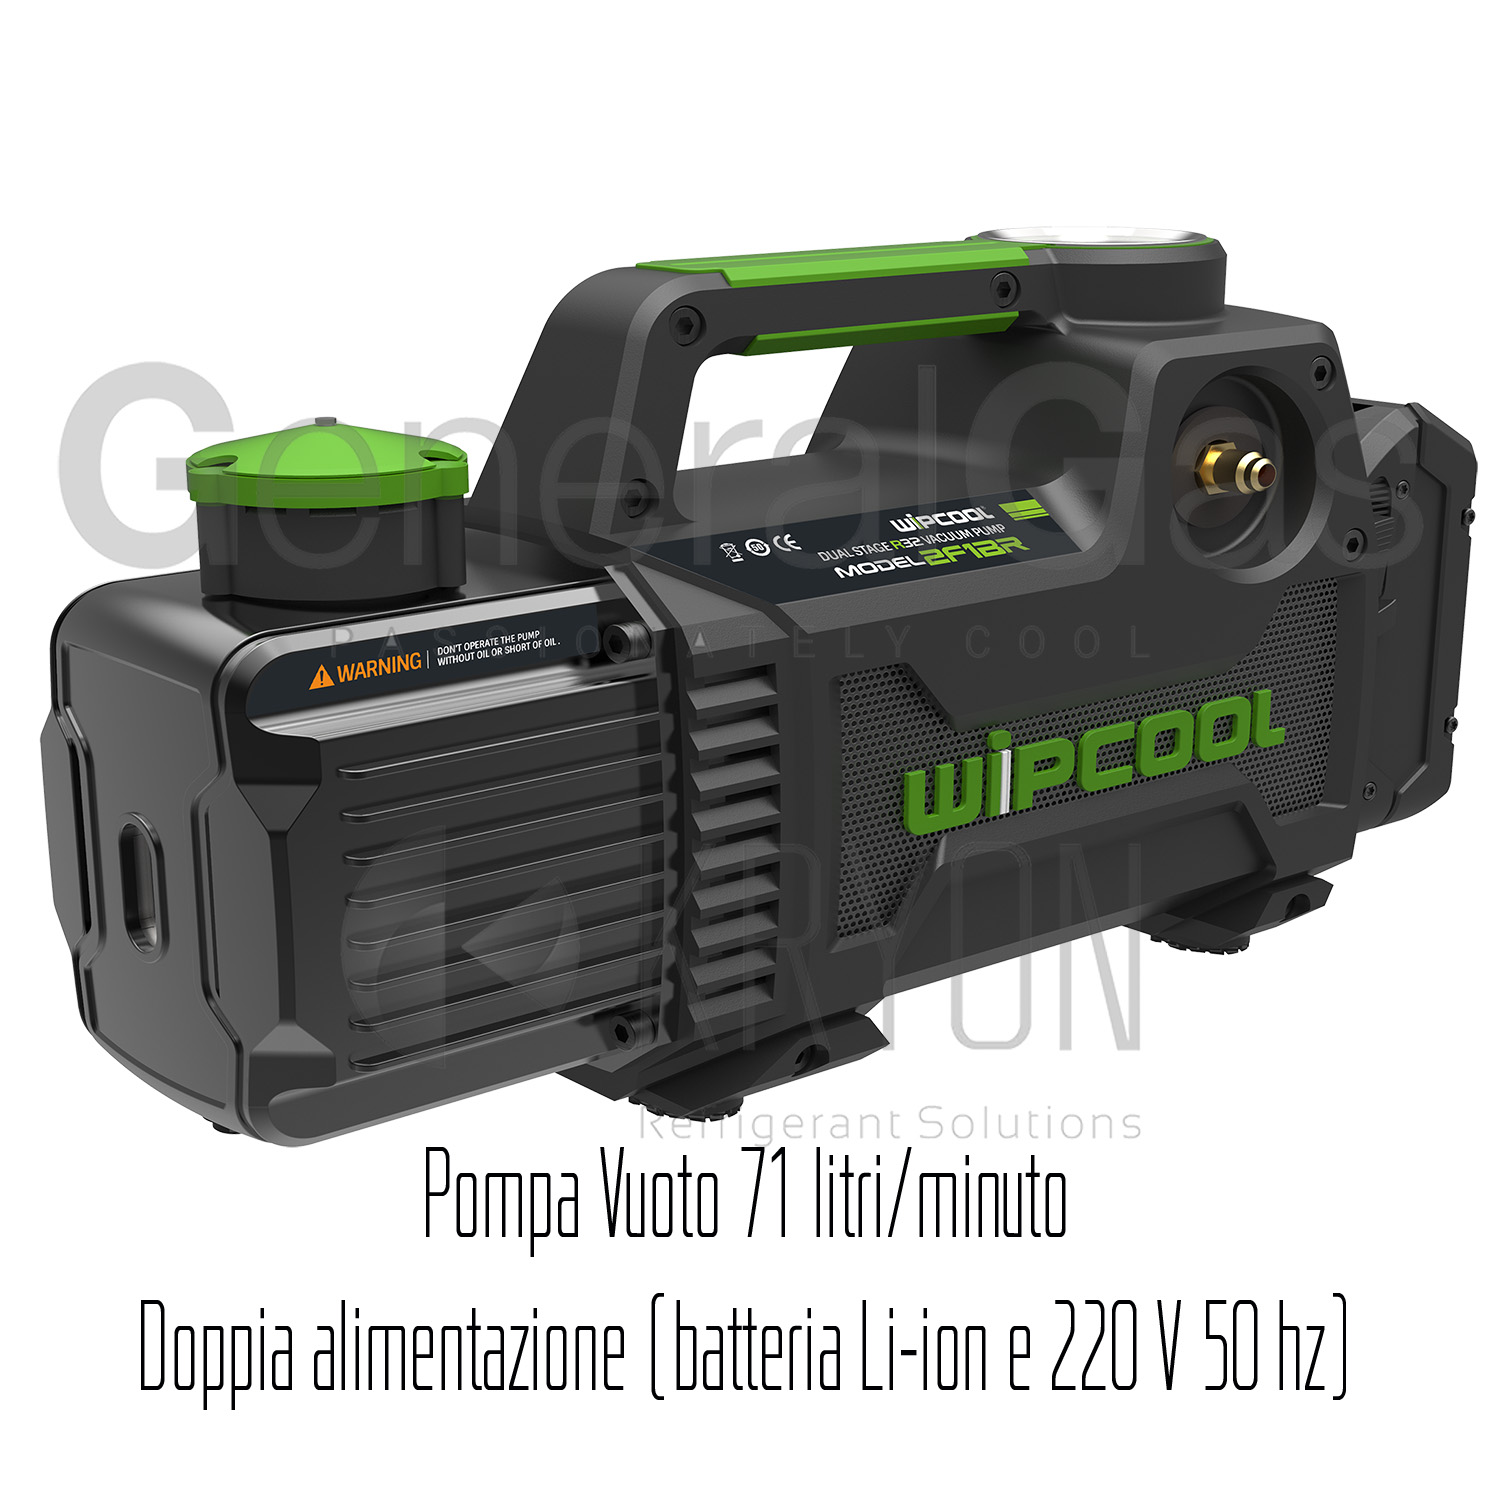 Vacuum pump 2F1BR - two stages, battery operated, flow rate 71 liters/minute, also suitable for R32 and A2L refrigerants (battery not included) - dual power supply:battery + 220V 50Hz